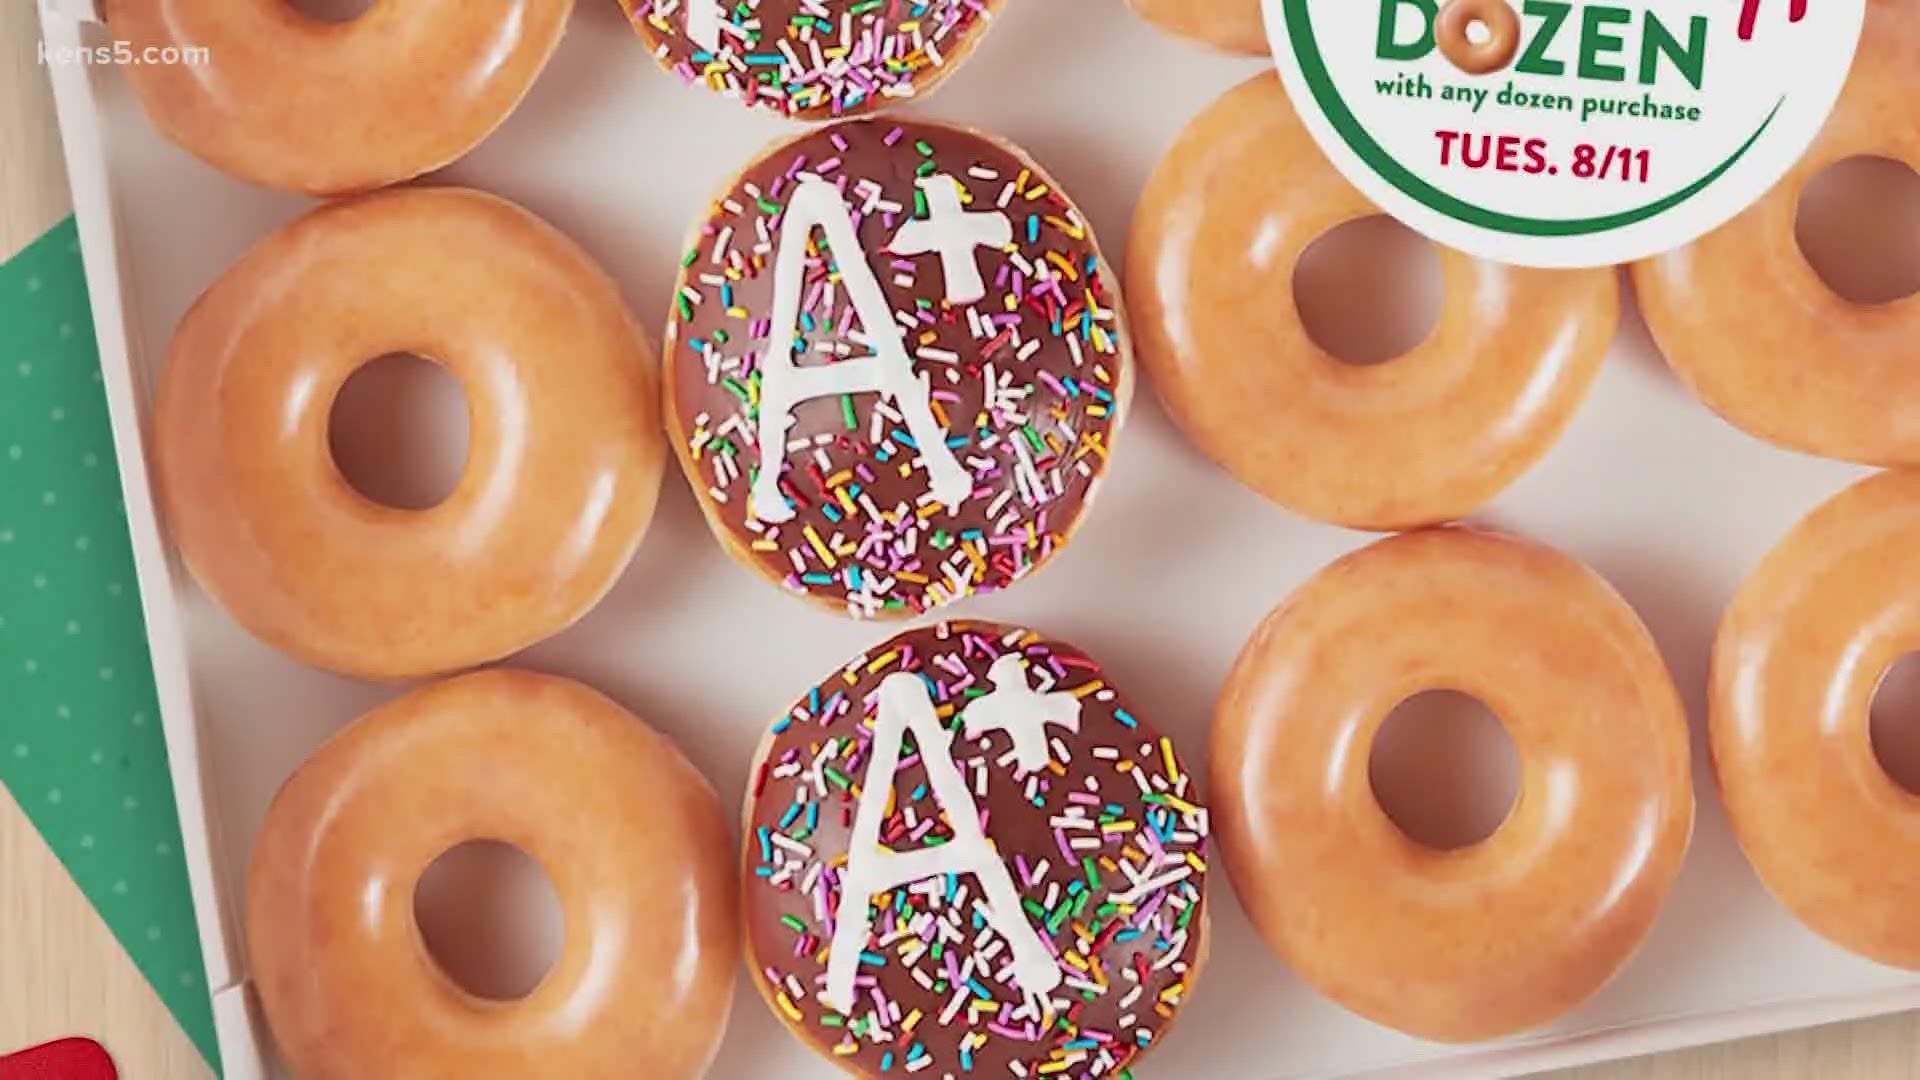 Krispy Kreme is offering a free donut and coffee to teachers between now and Friday at participating locations.